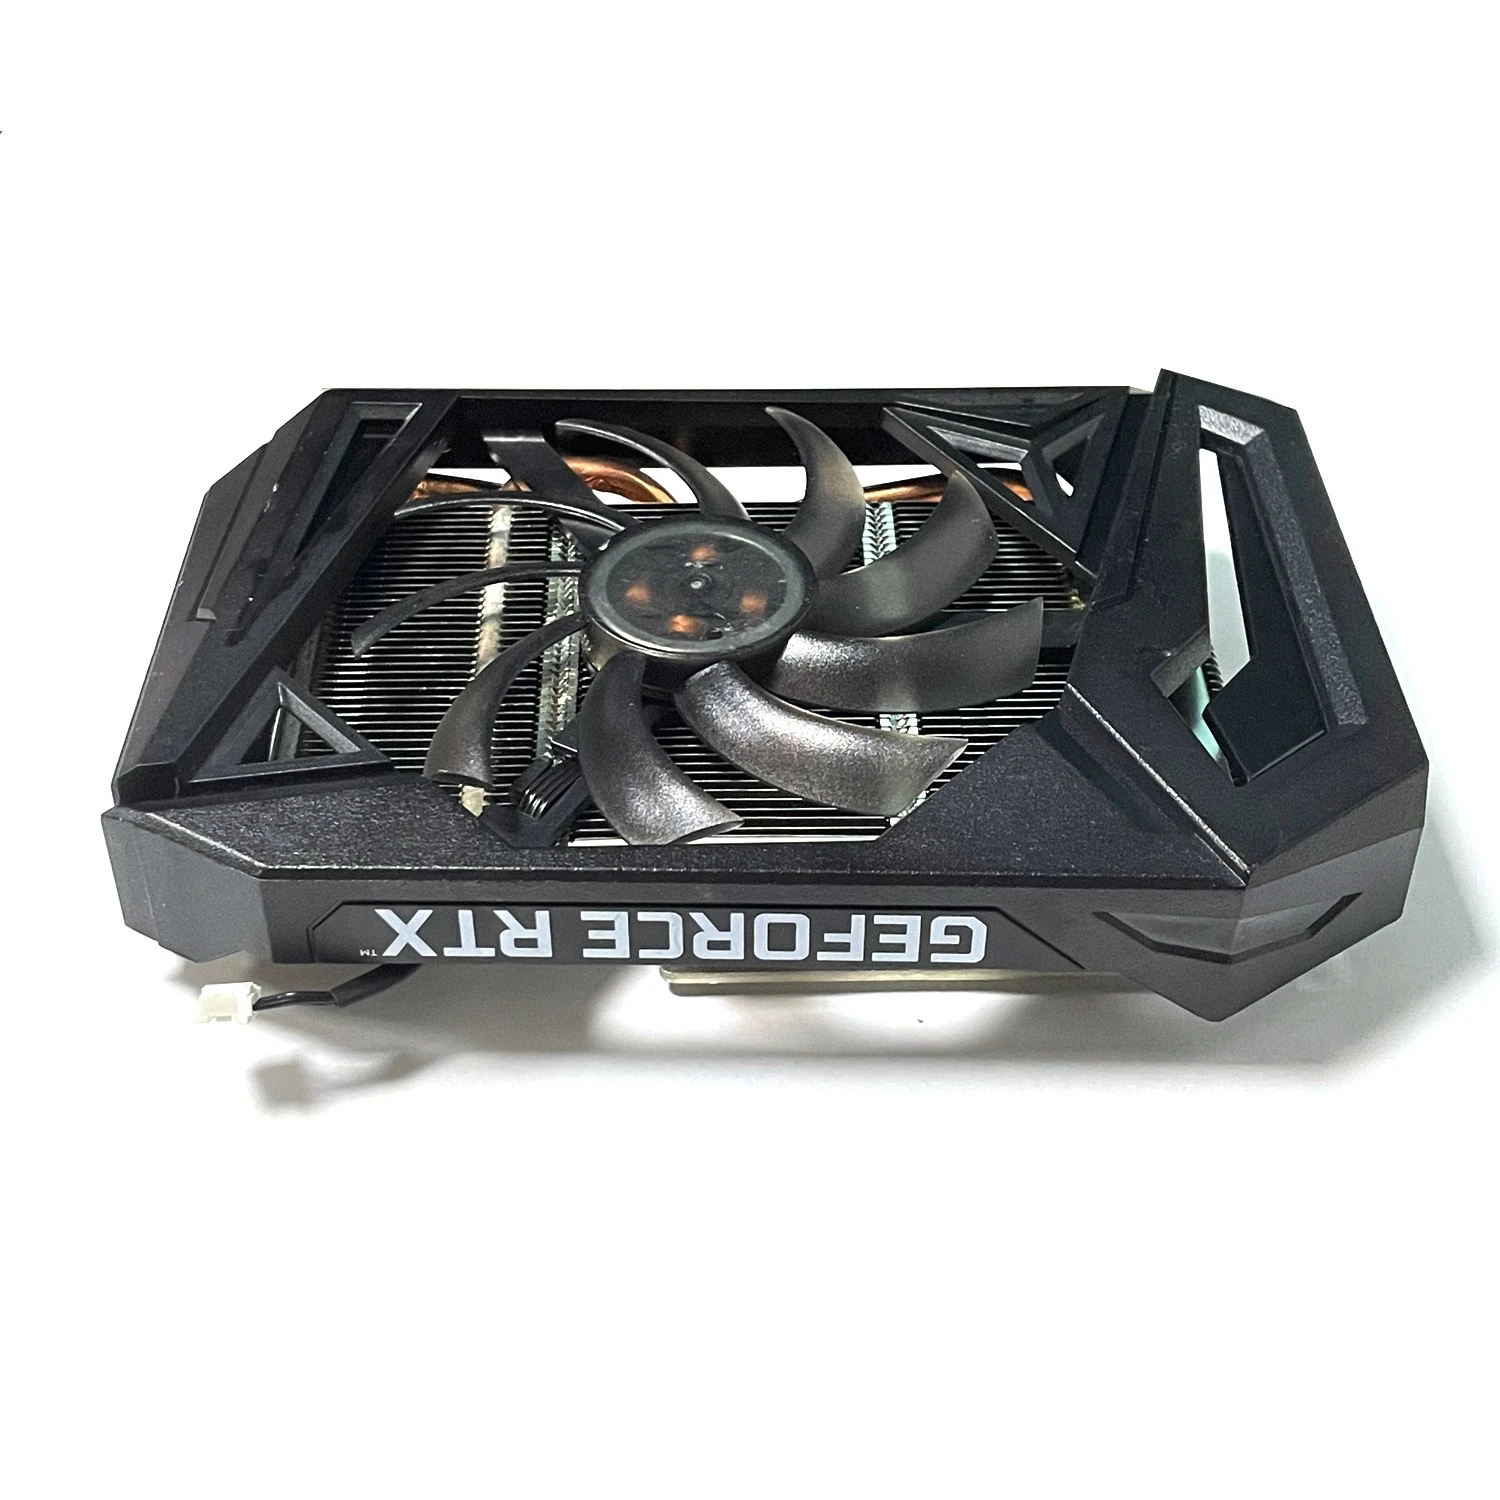 Source RTX 2060 GTX 1660S 1660TI PEGASUS Graphics Card Cooling Fan Brand New GPU Cooler Fan Replacement on m.alibaba.com